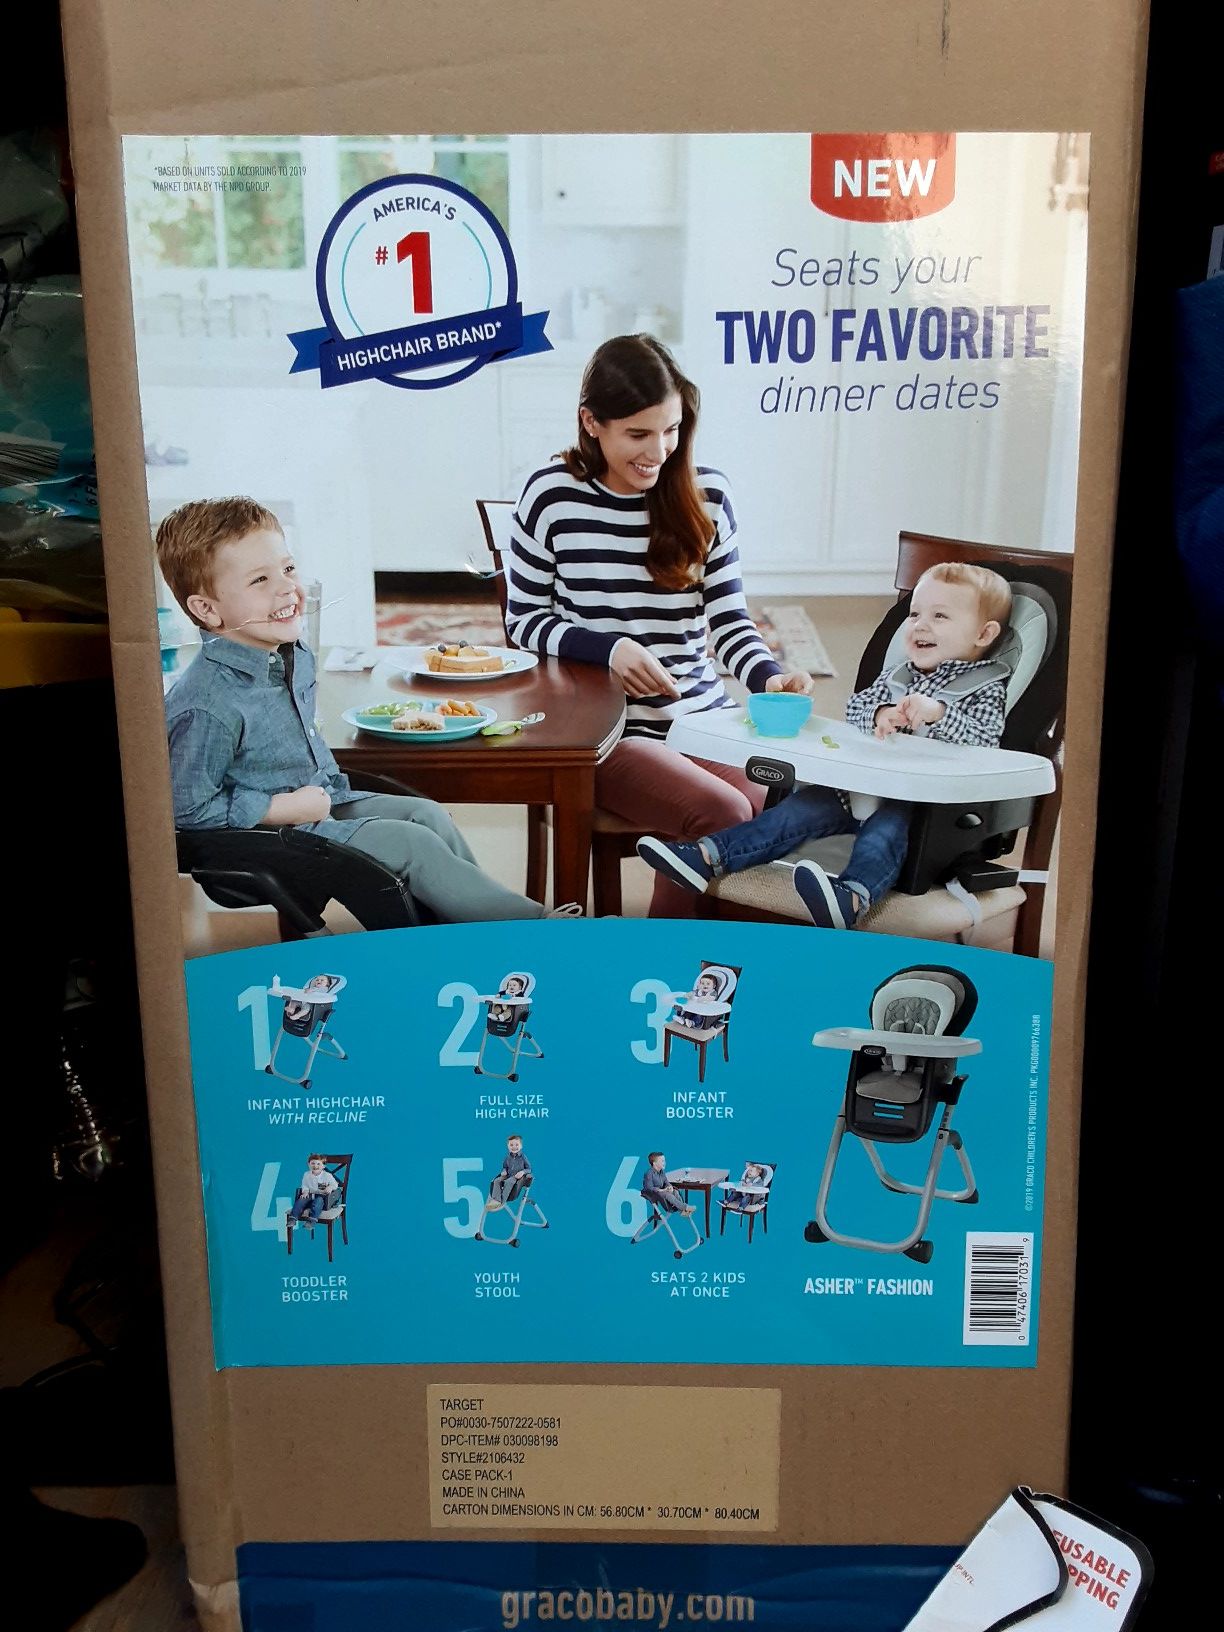 BRAND NEW GRACO 6 IN 1 HIGH CHAIR